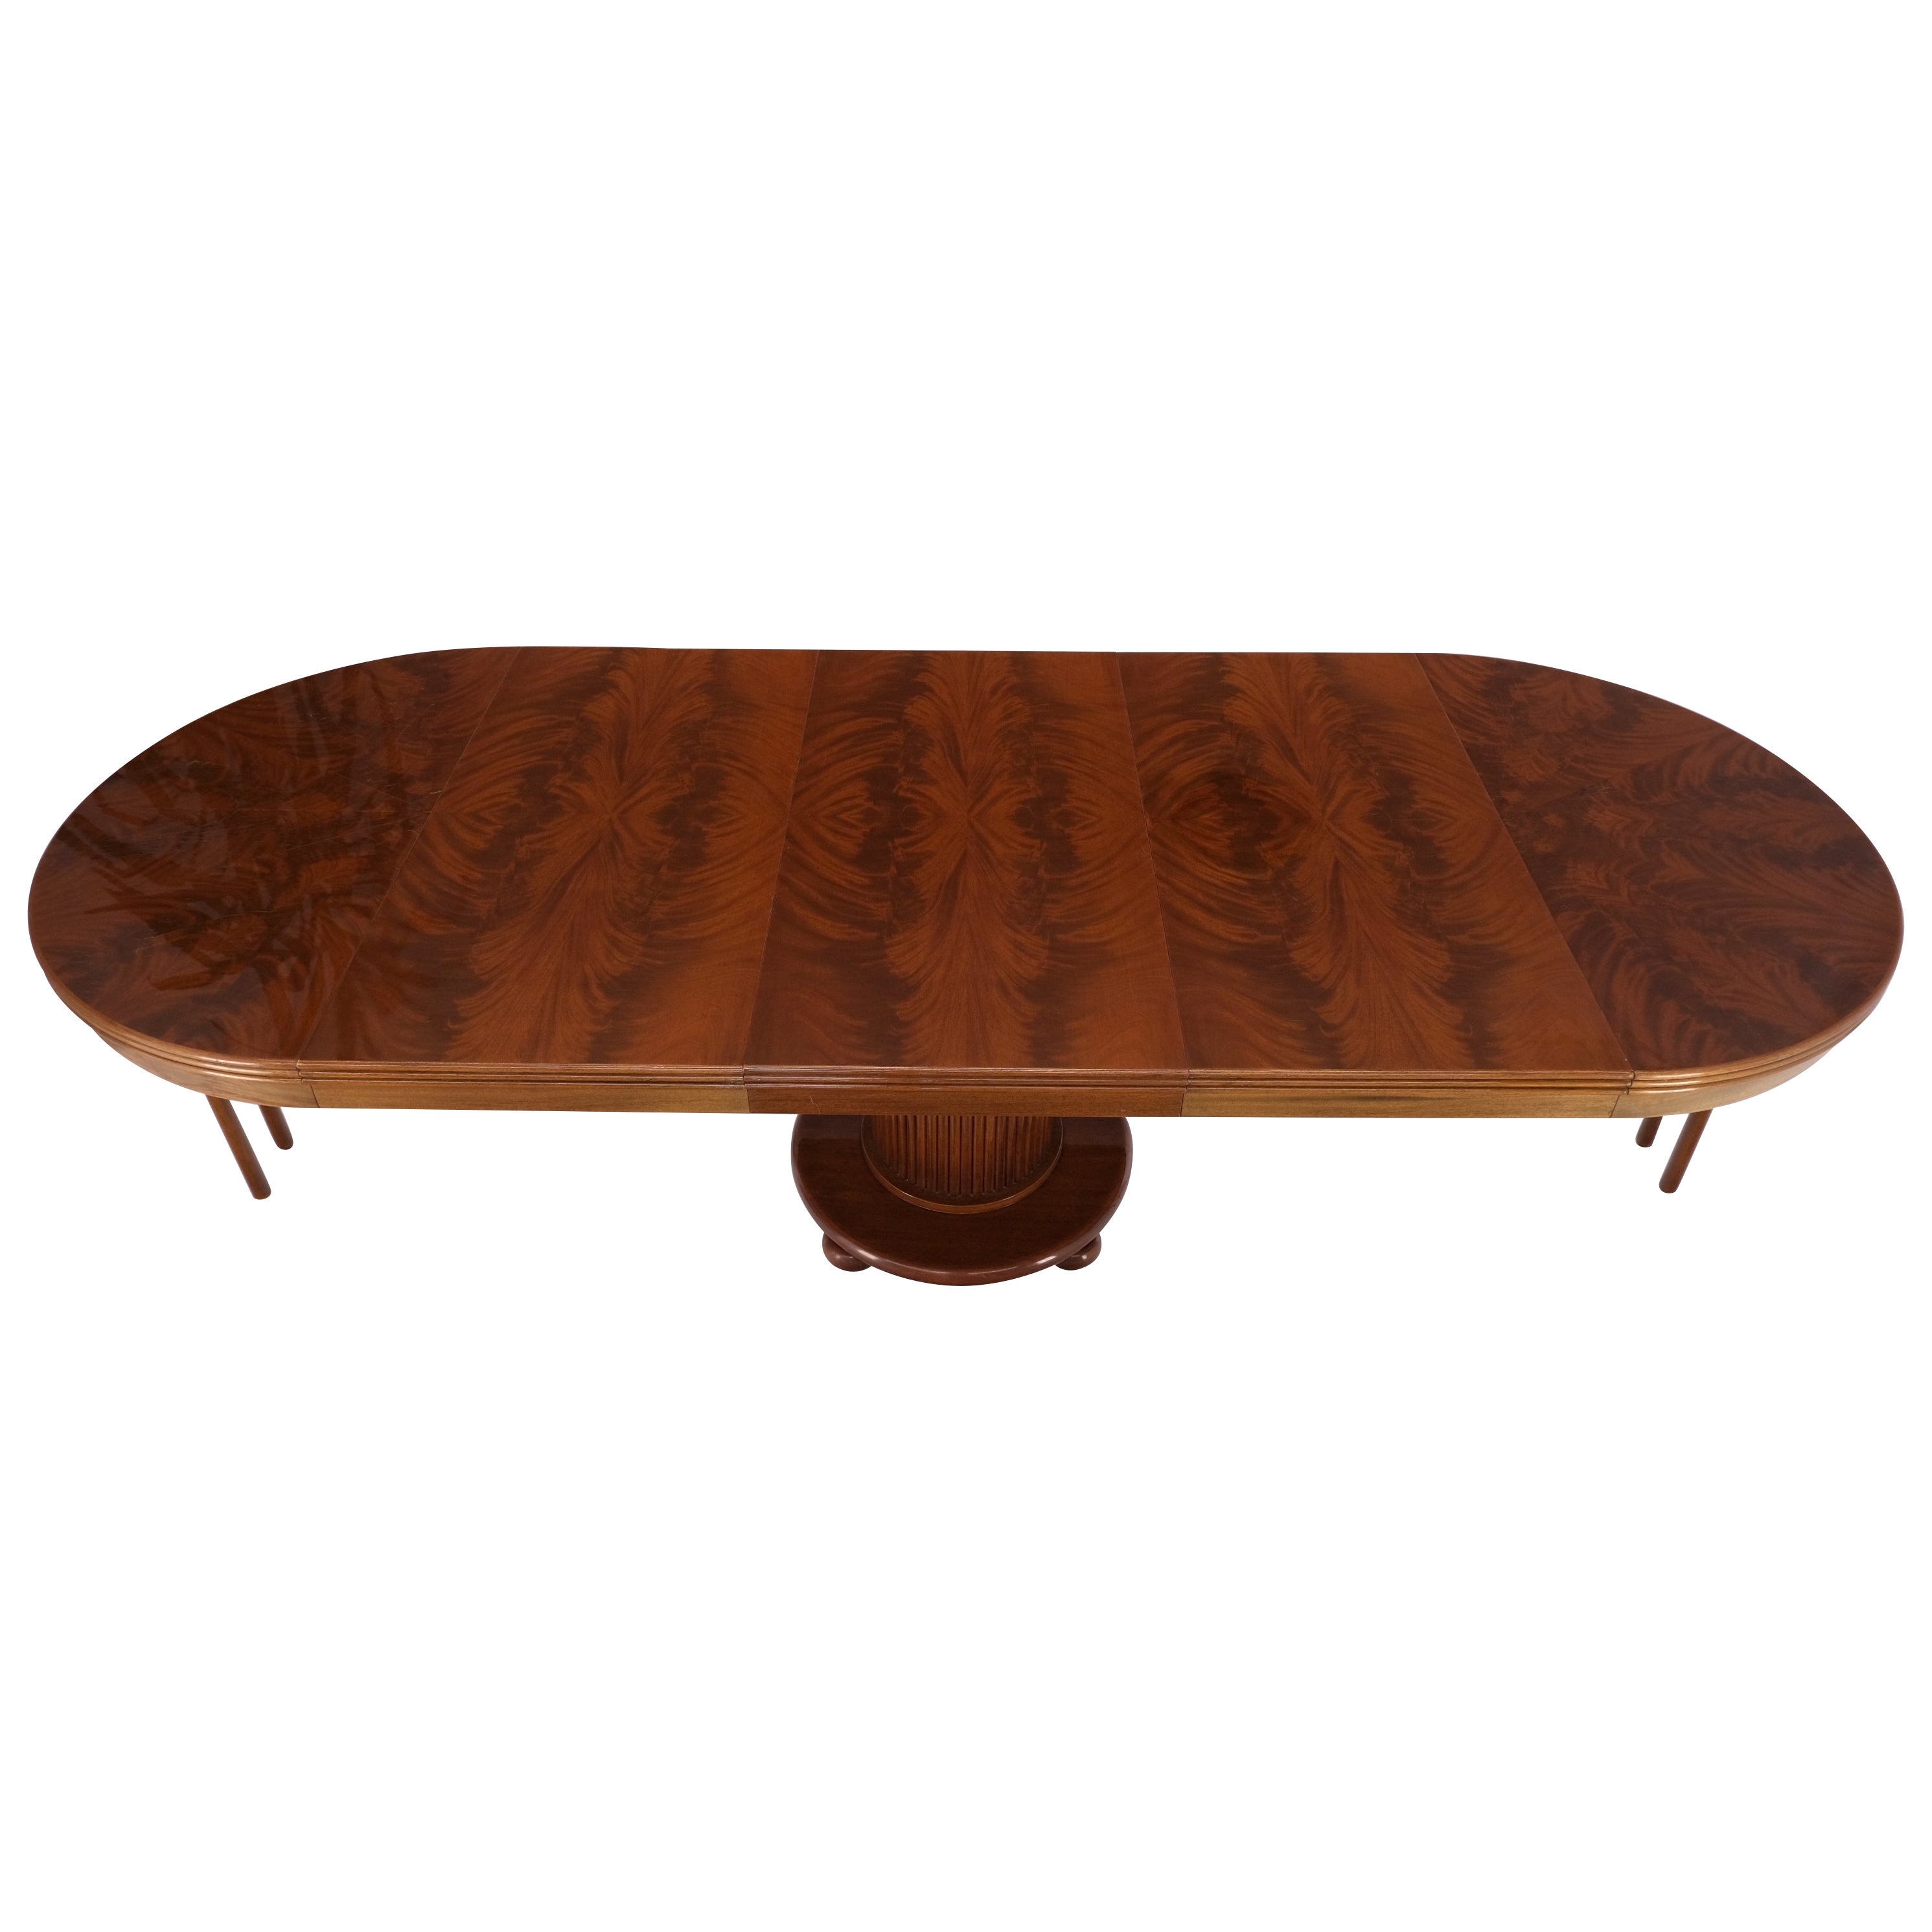 Burl Walnut Three Extension Boards Single Pedestal Round Dining Table For Sale